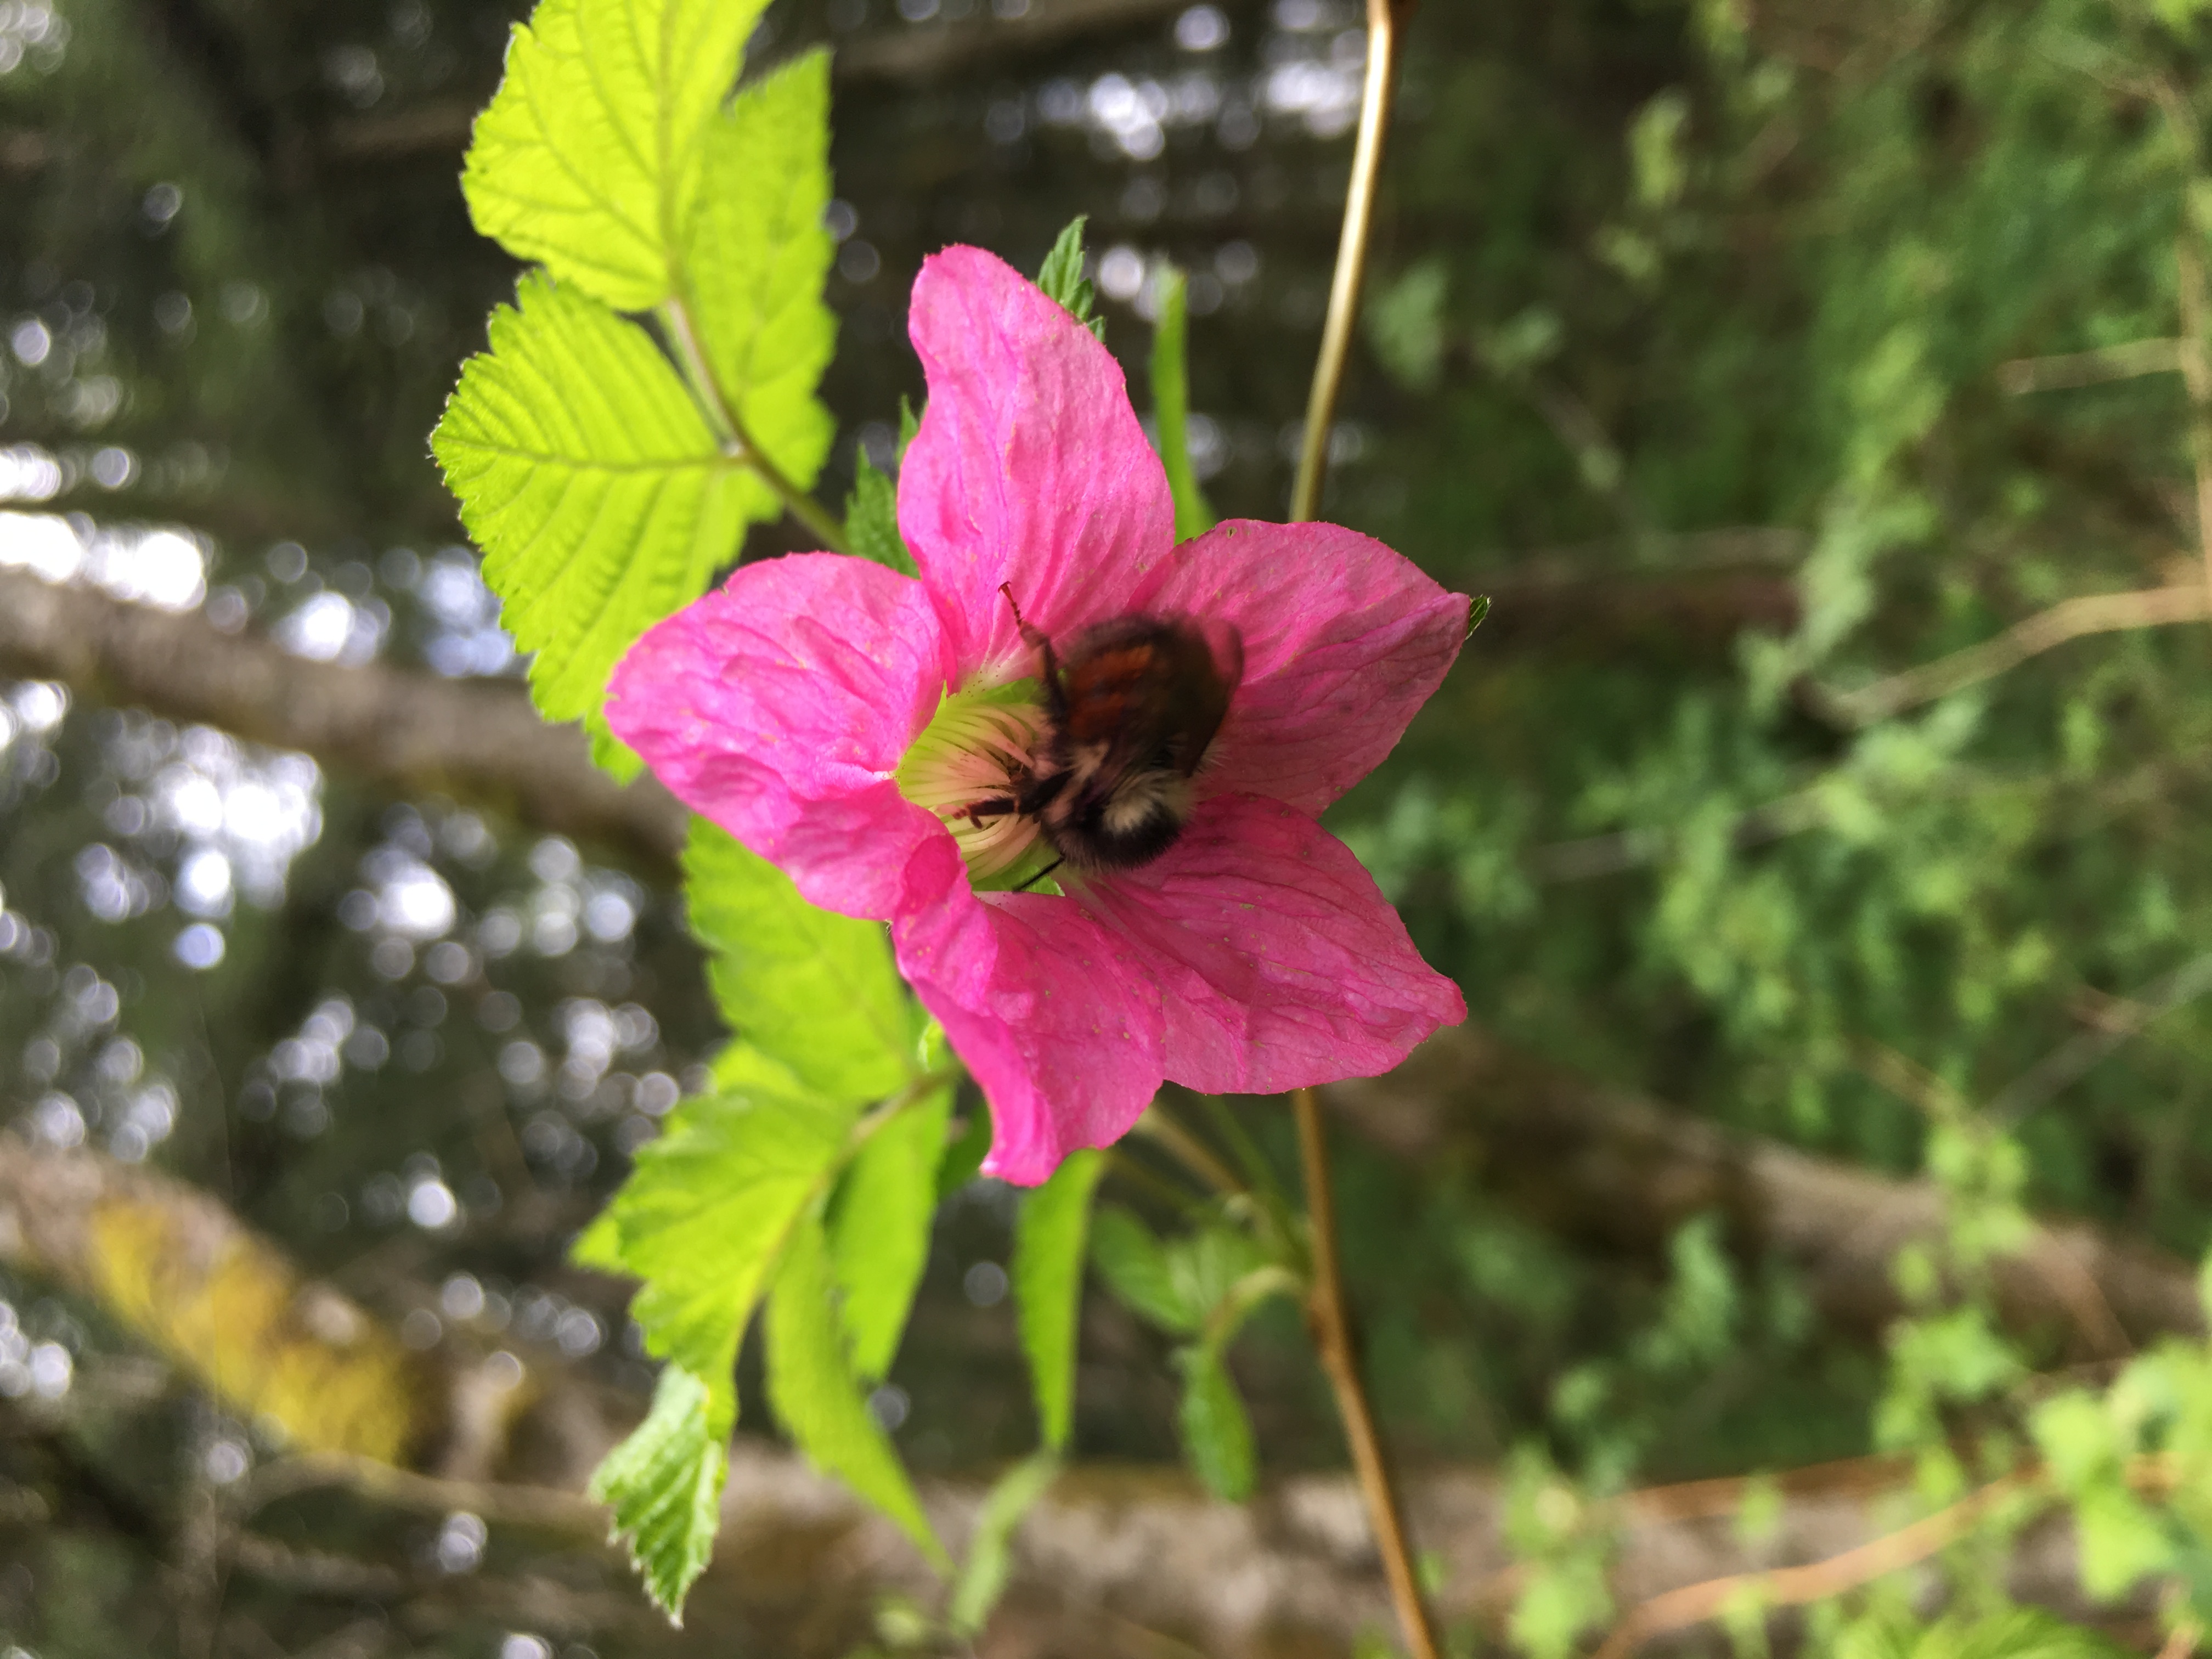 Pocket Gardens for Bees and Butterflies